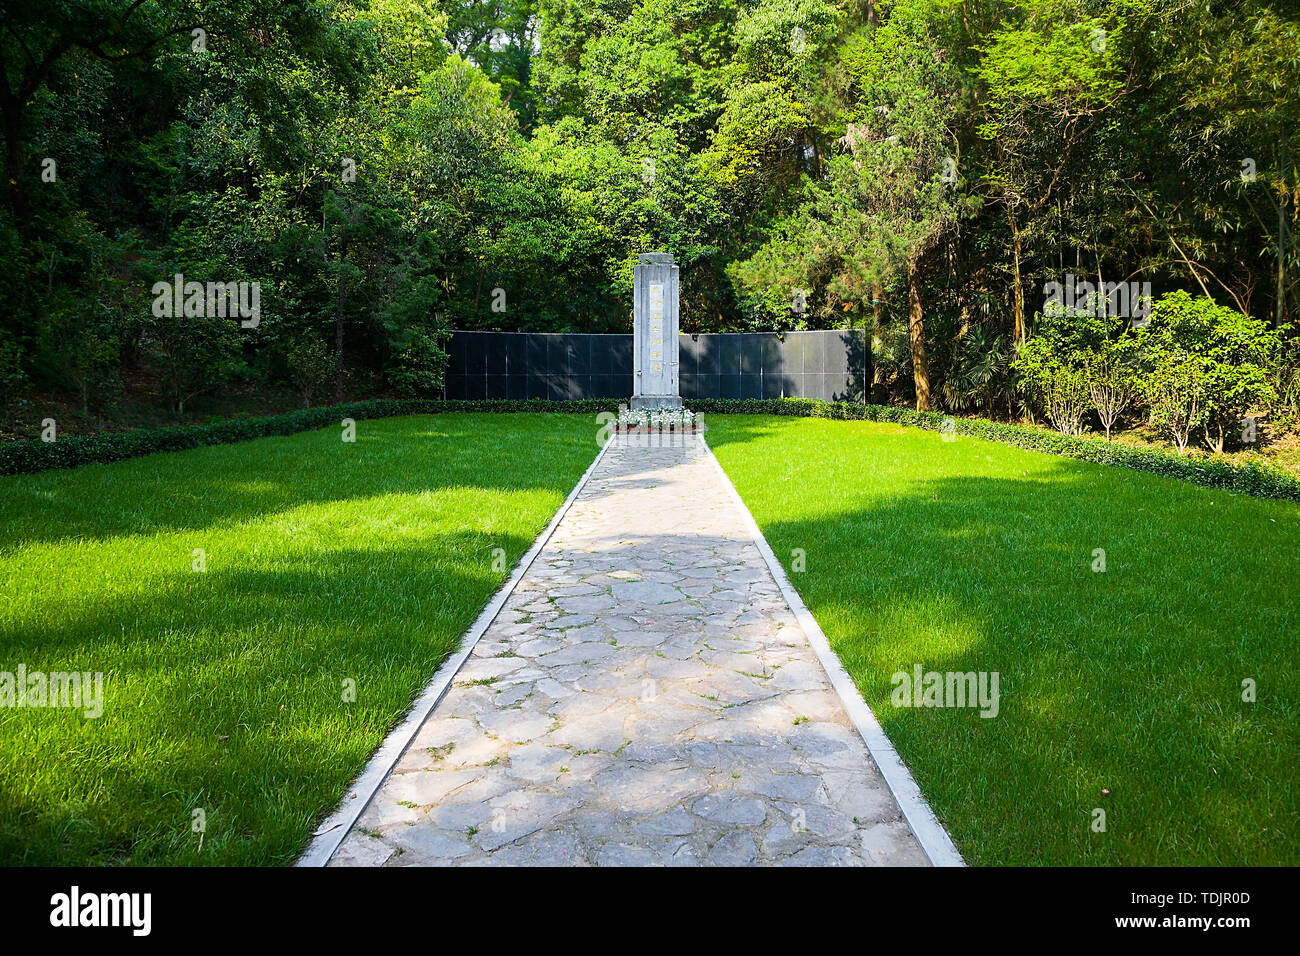 Nanjing Yuhuatai martyrs cemetery east martyrdom place. Stock Photo